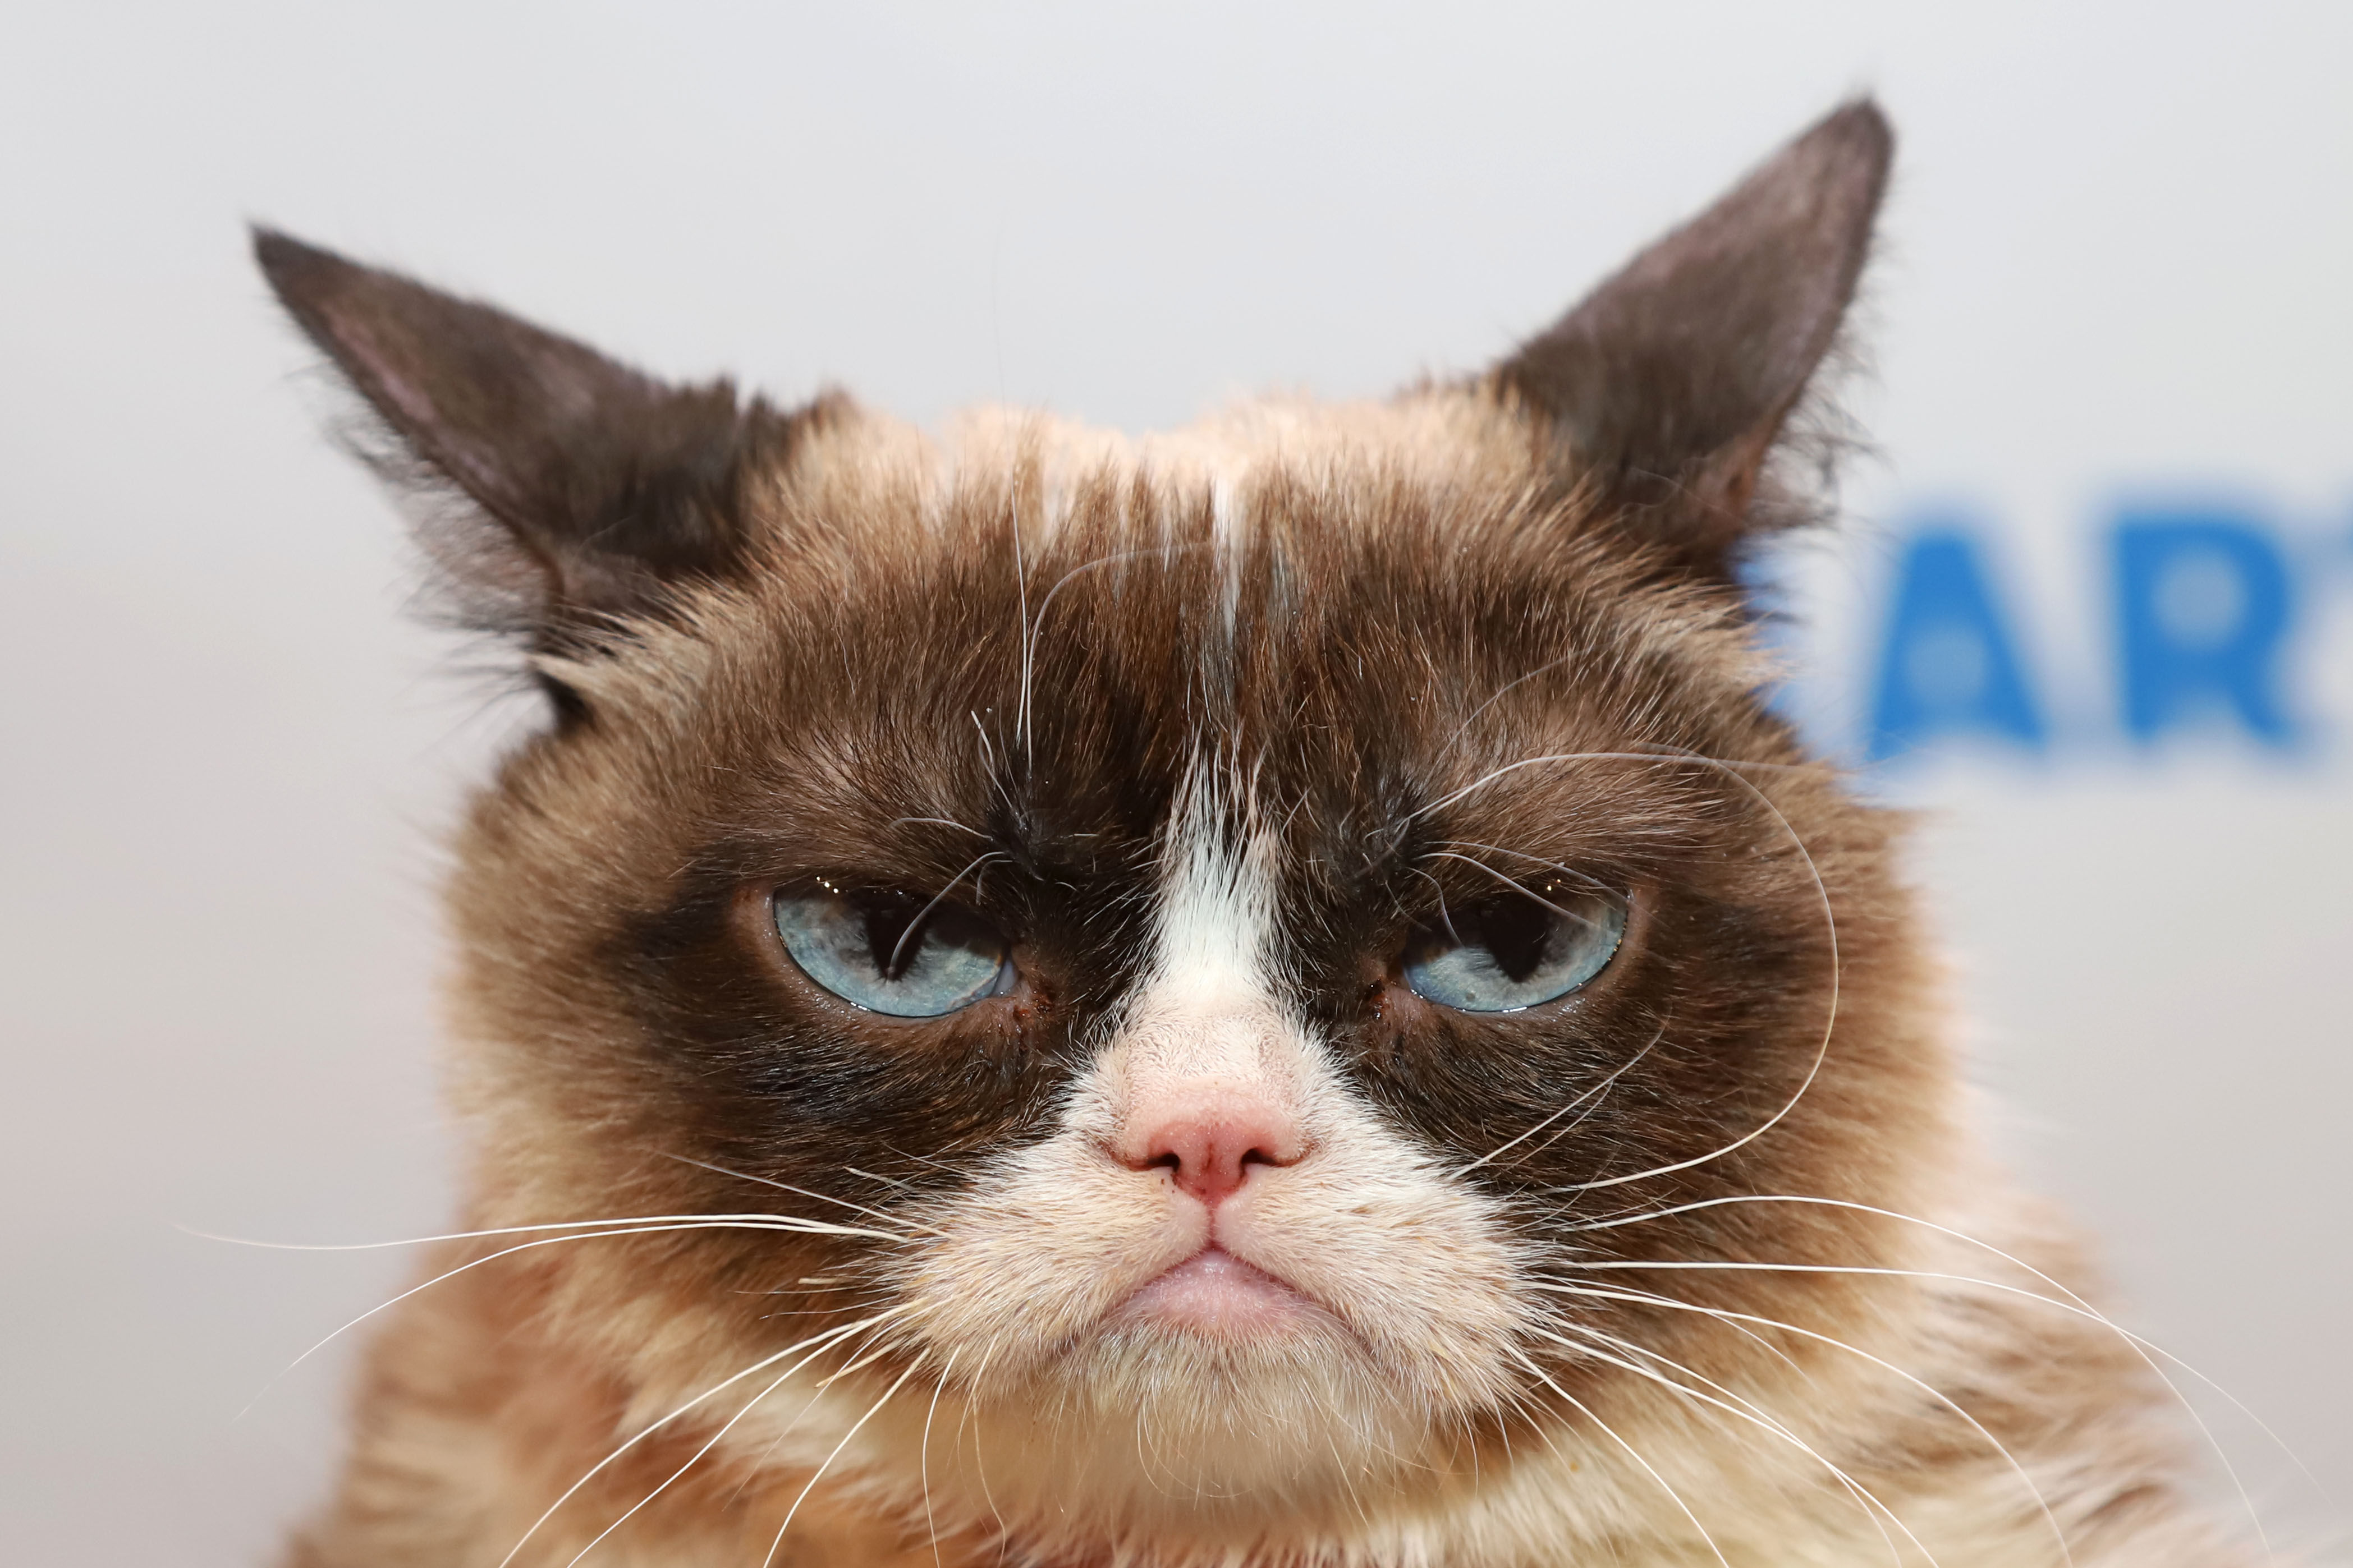 Internet S Famous Grumpy Cat Dies At Age 7 Live Science